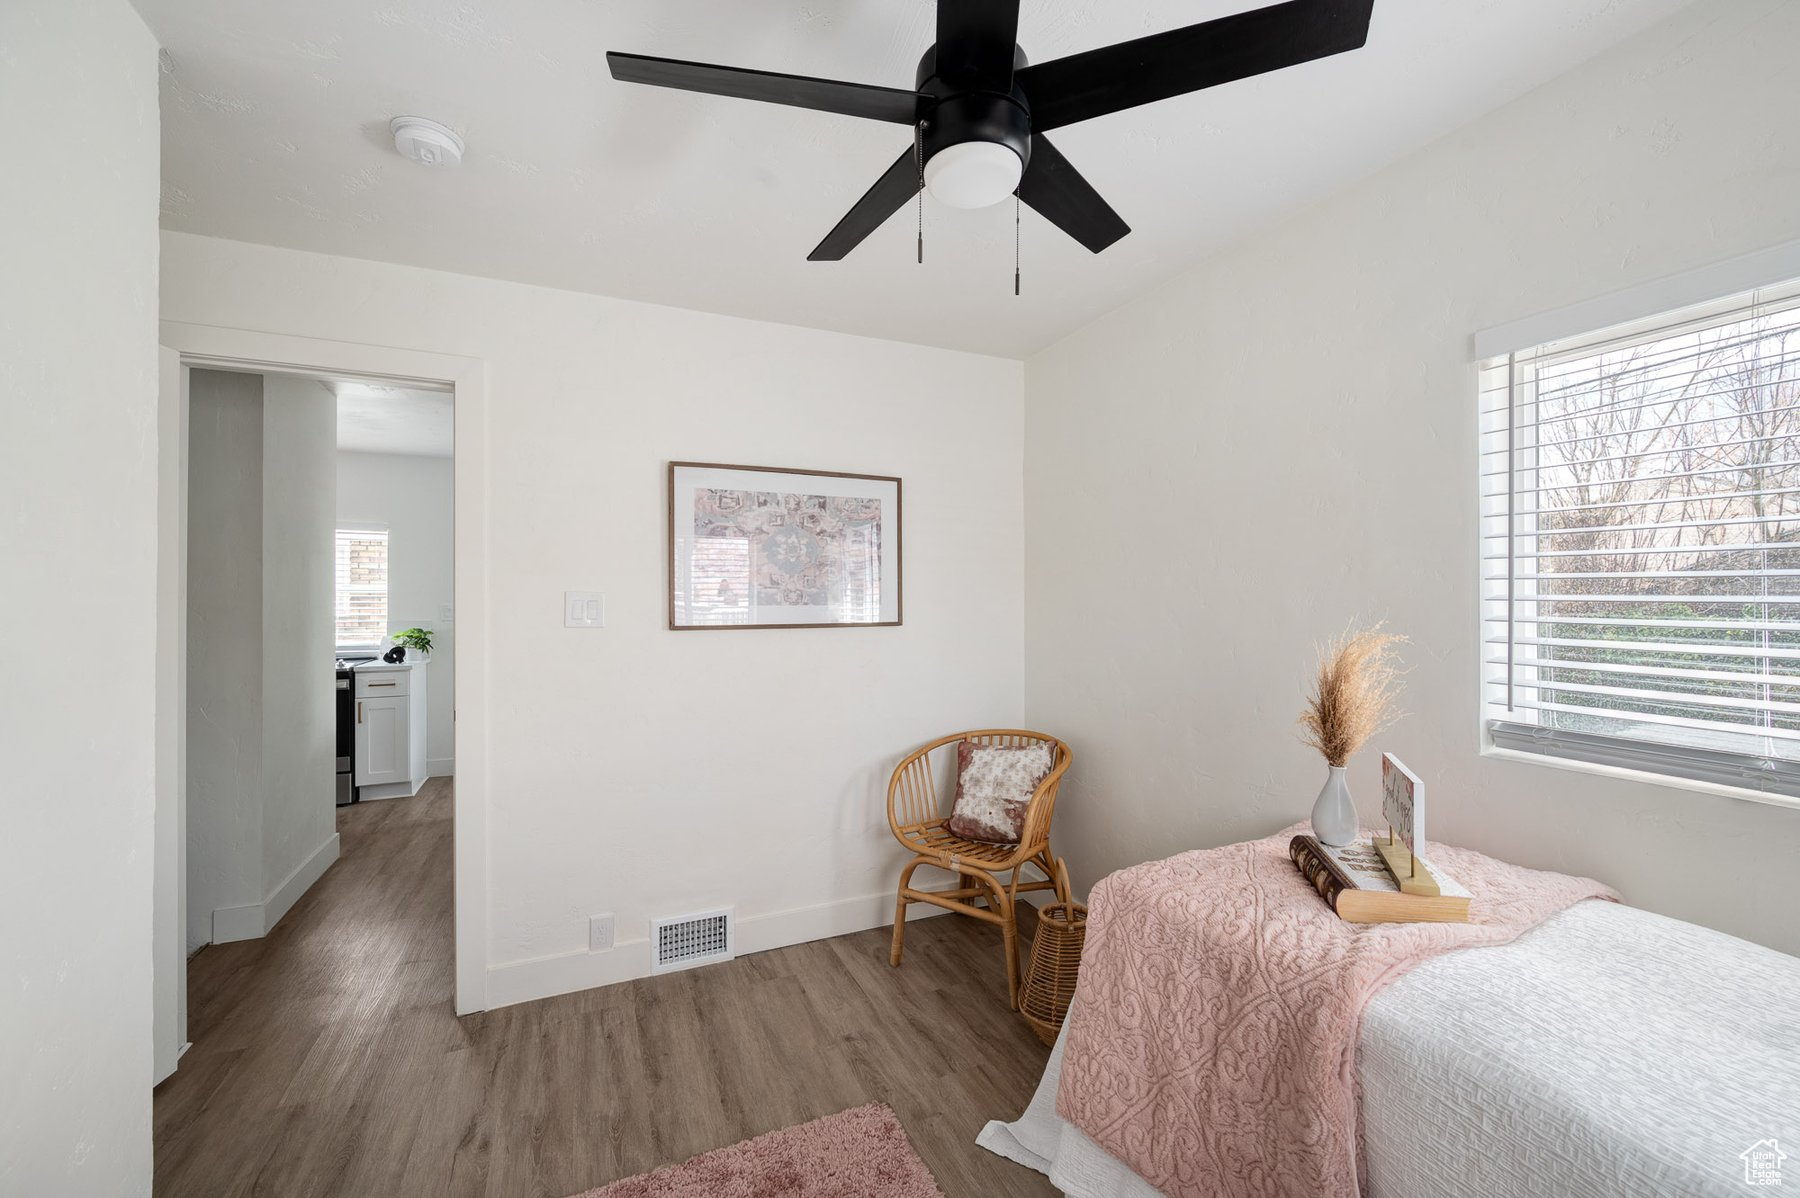 Bedroom featuring multiple windows, ceiling fan, and natural light